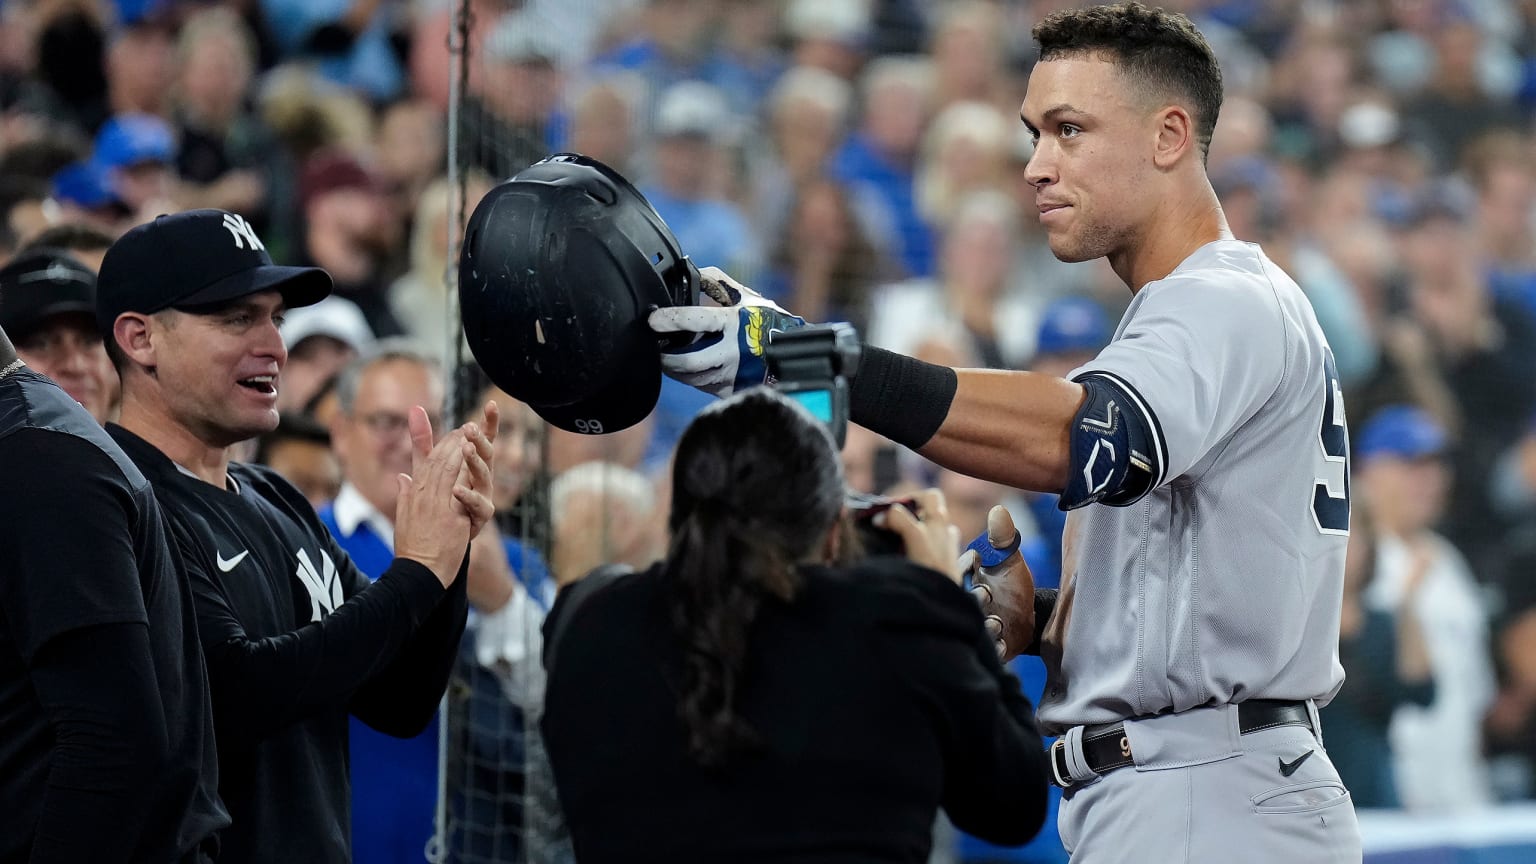 Aaron Judge tips his helmet toward the crowd as he stands in front of the Yankees dugout in Toronto after hitting his 61st home run